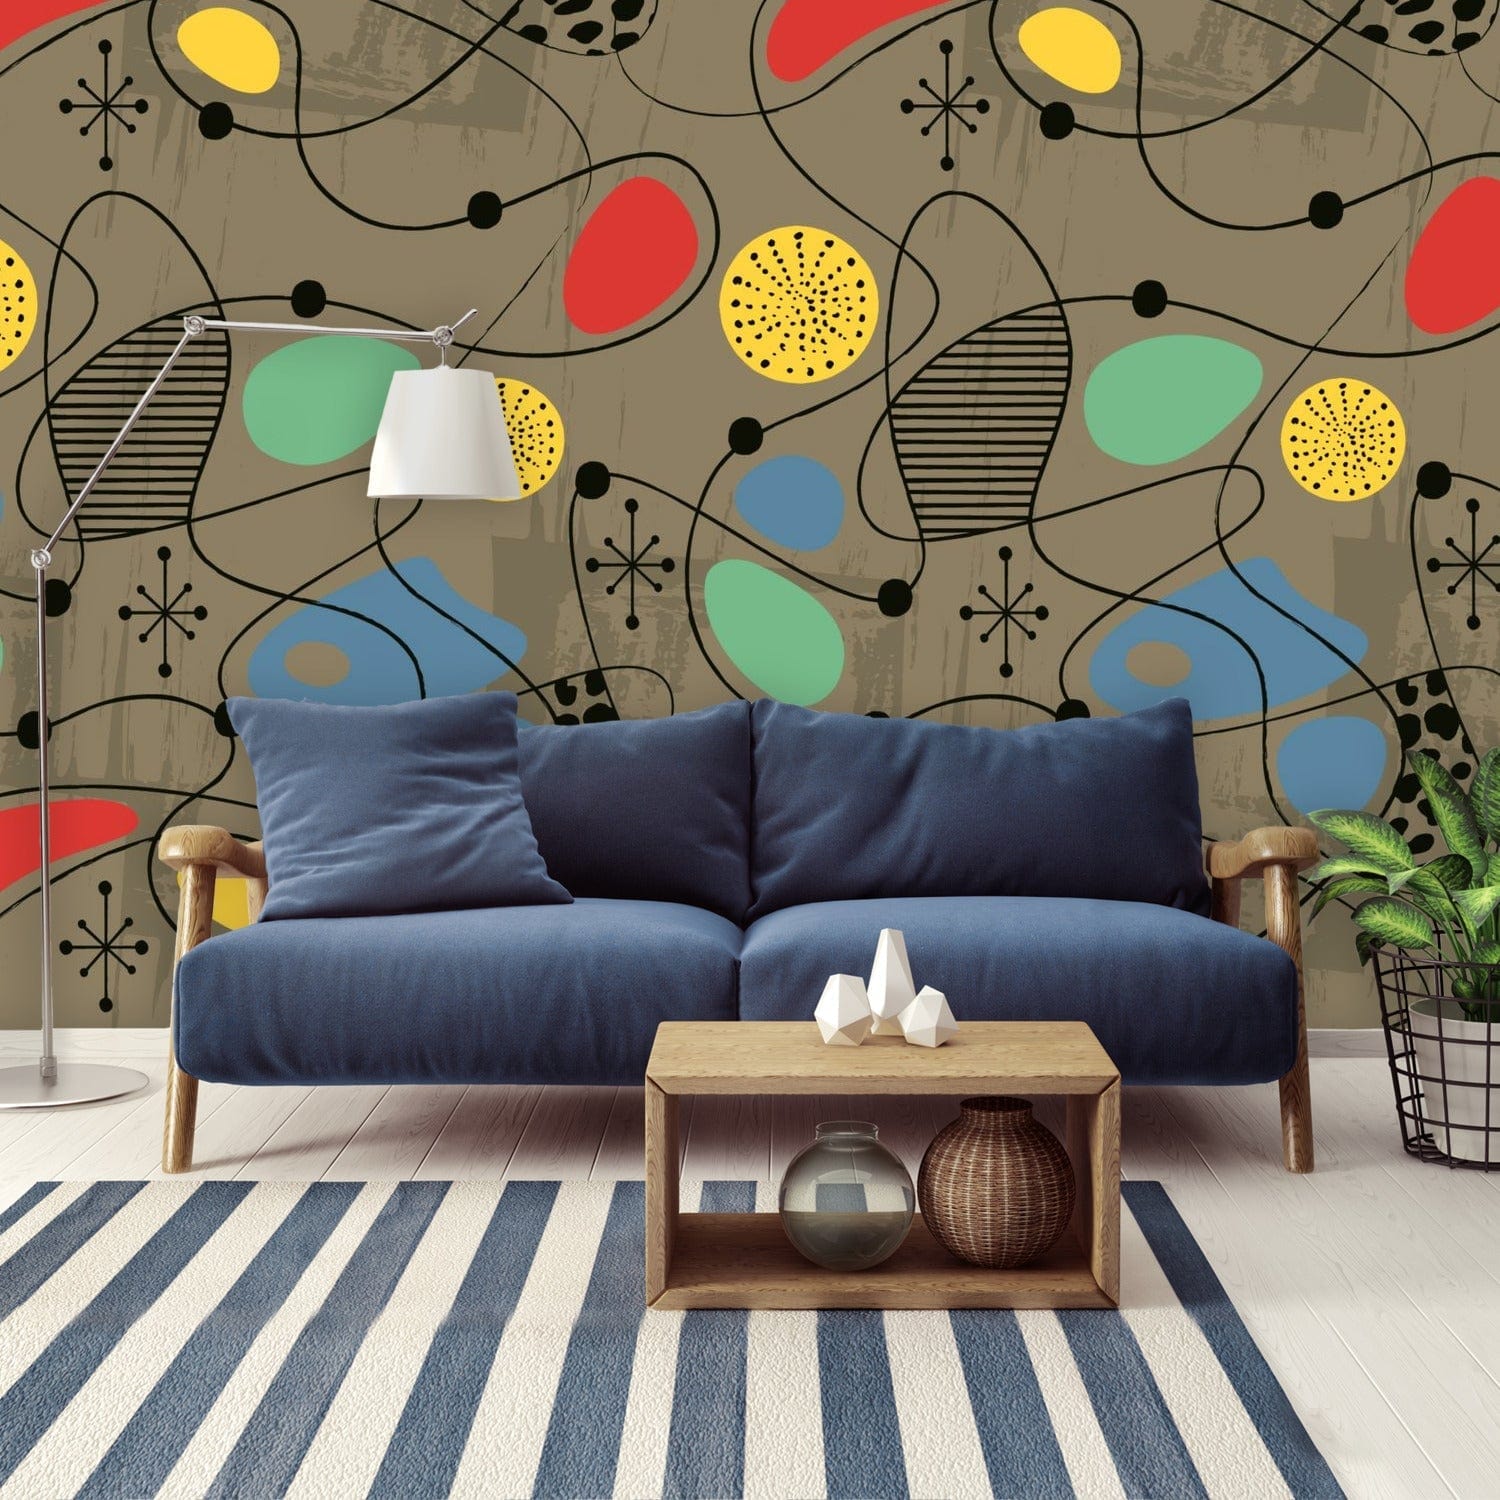 Mid Century Modern Wallpaper Sand Brown, Abstract Retro Atomic Starburst Peel And Stick Wall Murals Wallpaper H96 x W140